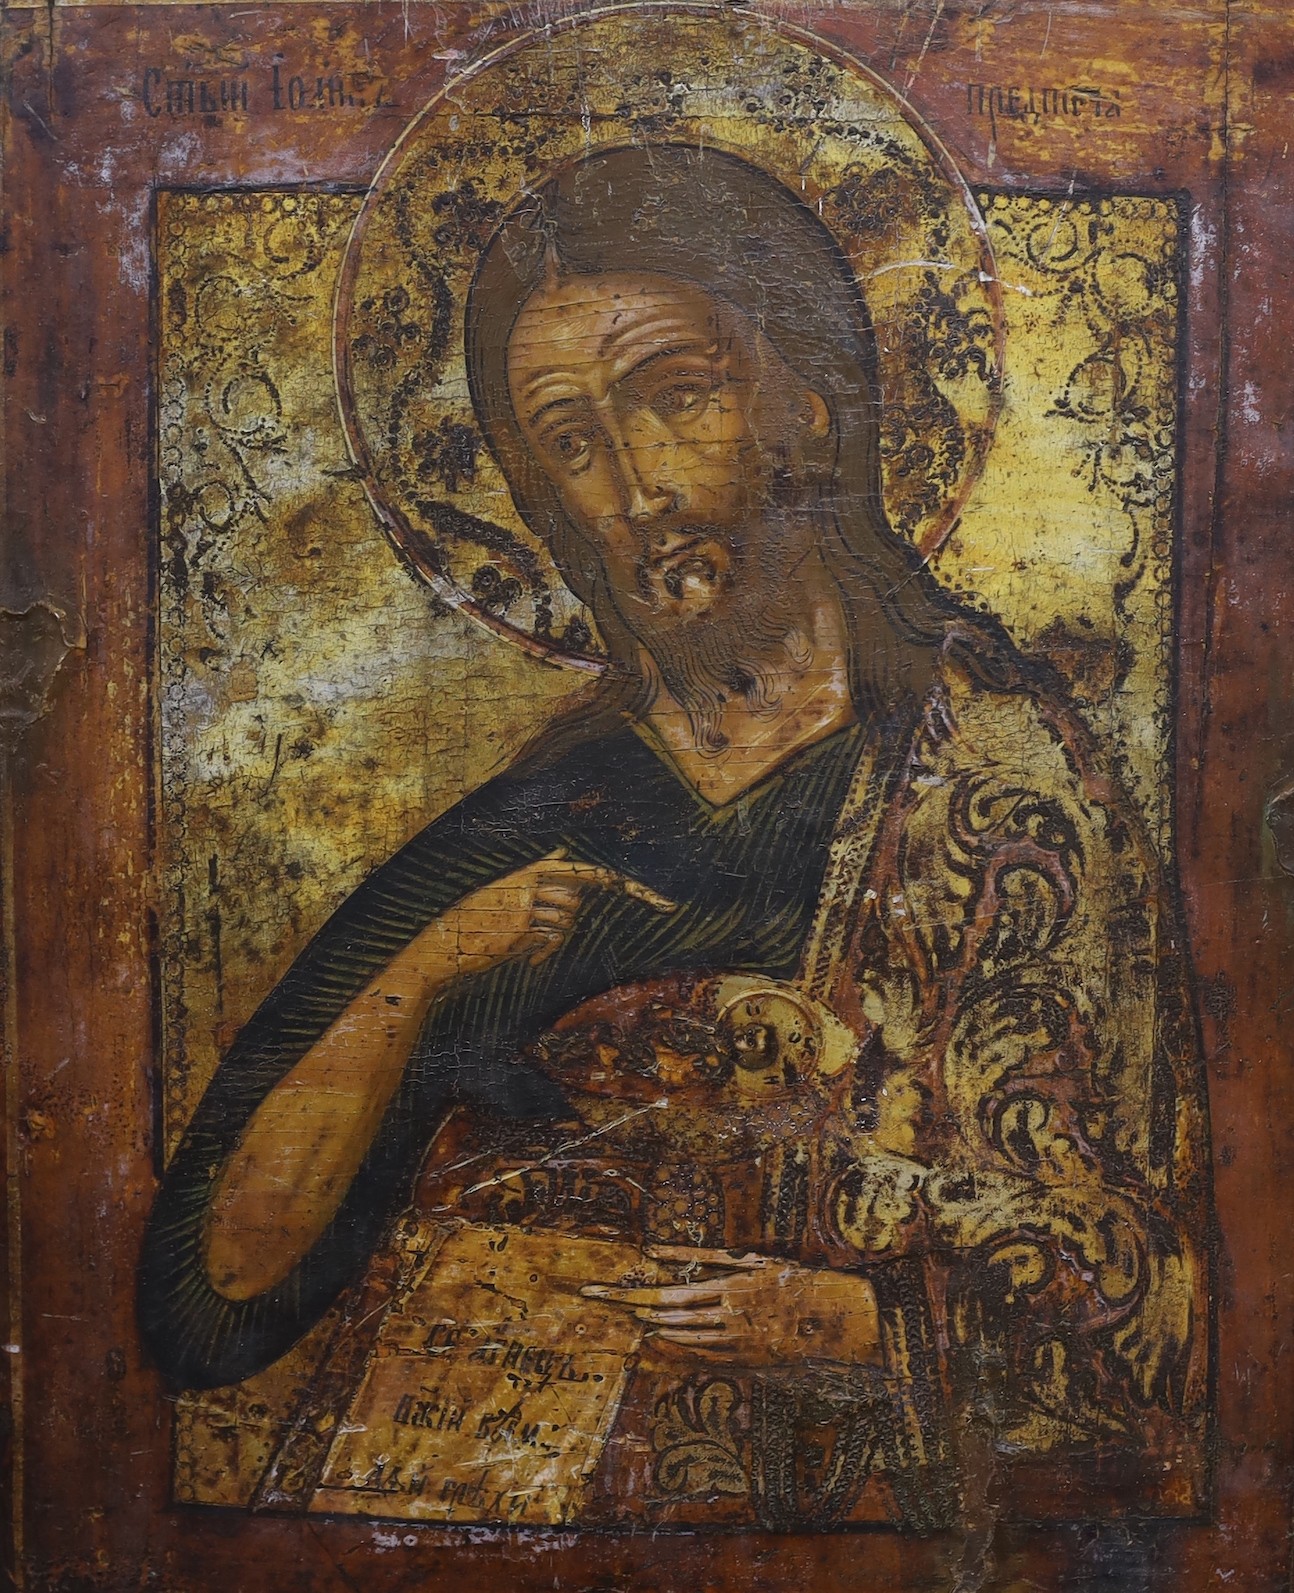 19th century South Russian School, tempera on wooden panel, Icon of God holding the Christ child and giving a benediction, 40 x 33cm, unframed